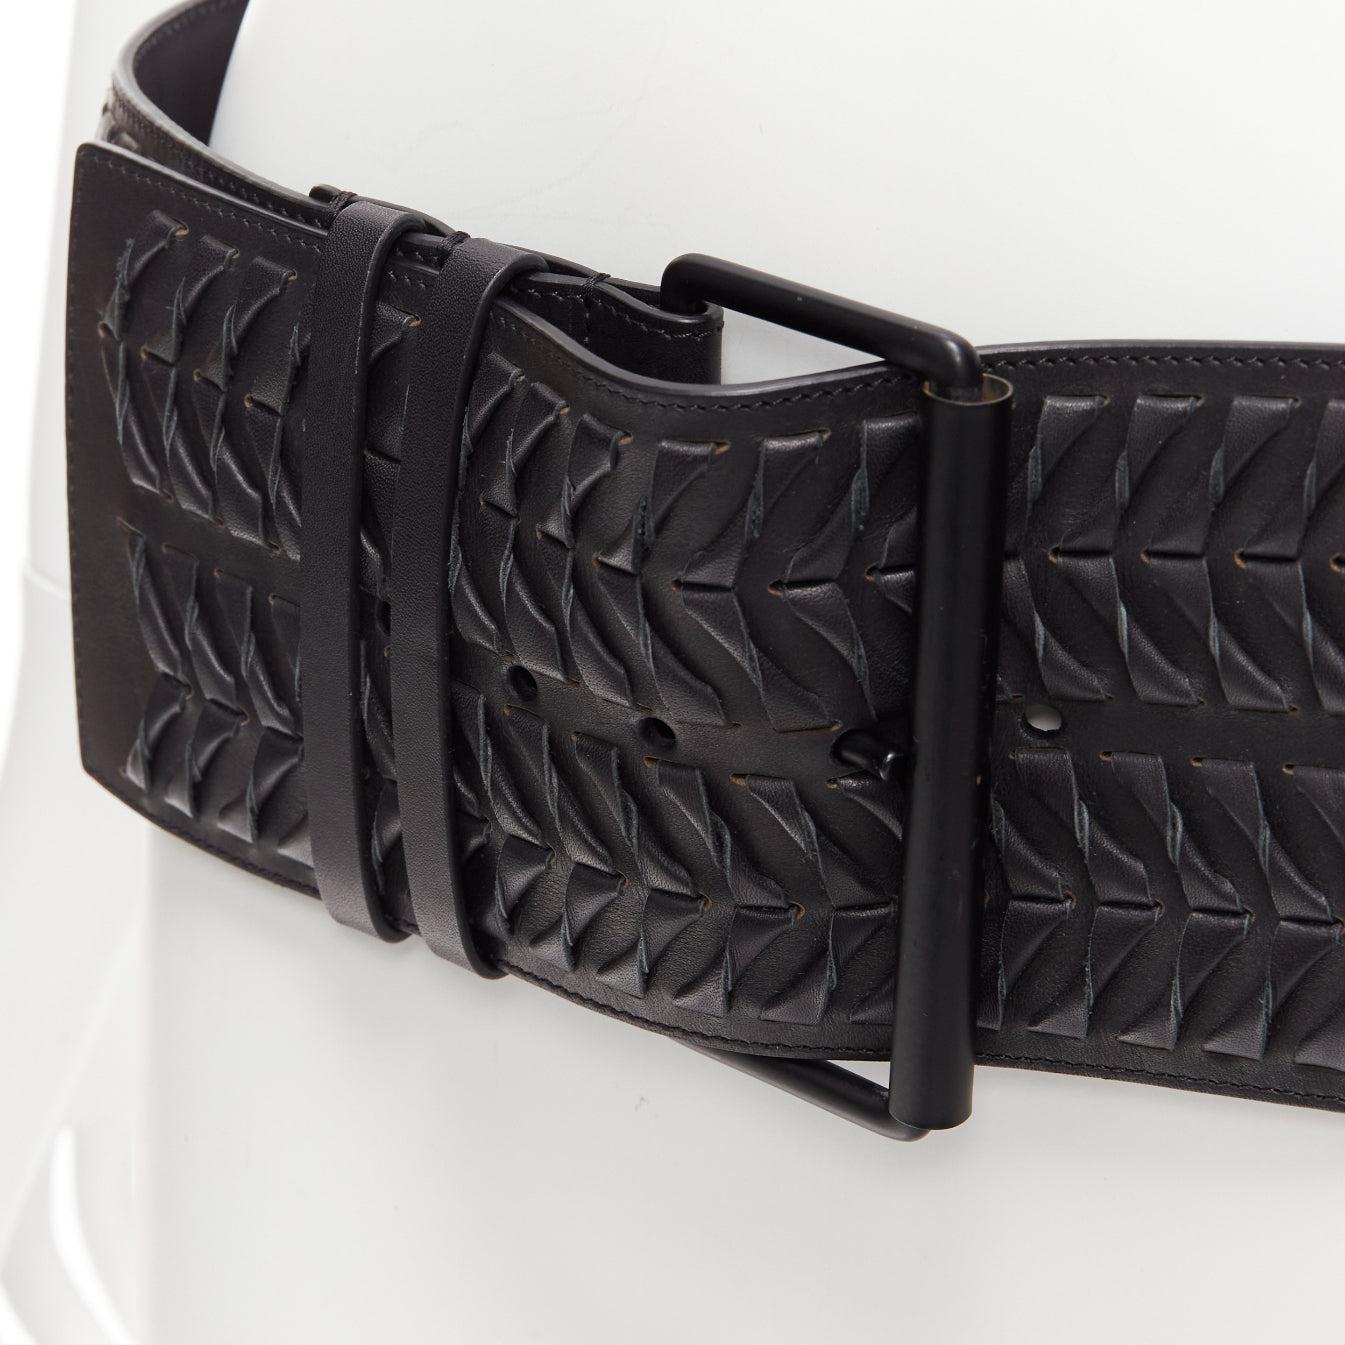 rare HAIDER ACKERMANN black leather woven wide buckle oversized belt L
Reference: CNLE/A00267
Brand: Haider Ackermann
Collection: Runway
Material: Leather, Metal
Color: Black
Pattern: Solid
Closure: Belt
Lining: Black Leather
Made in: